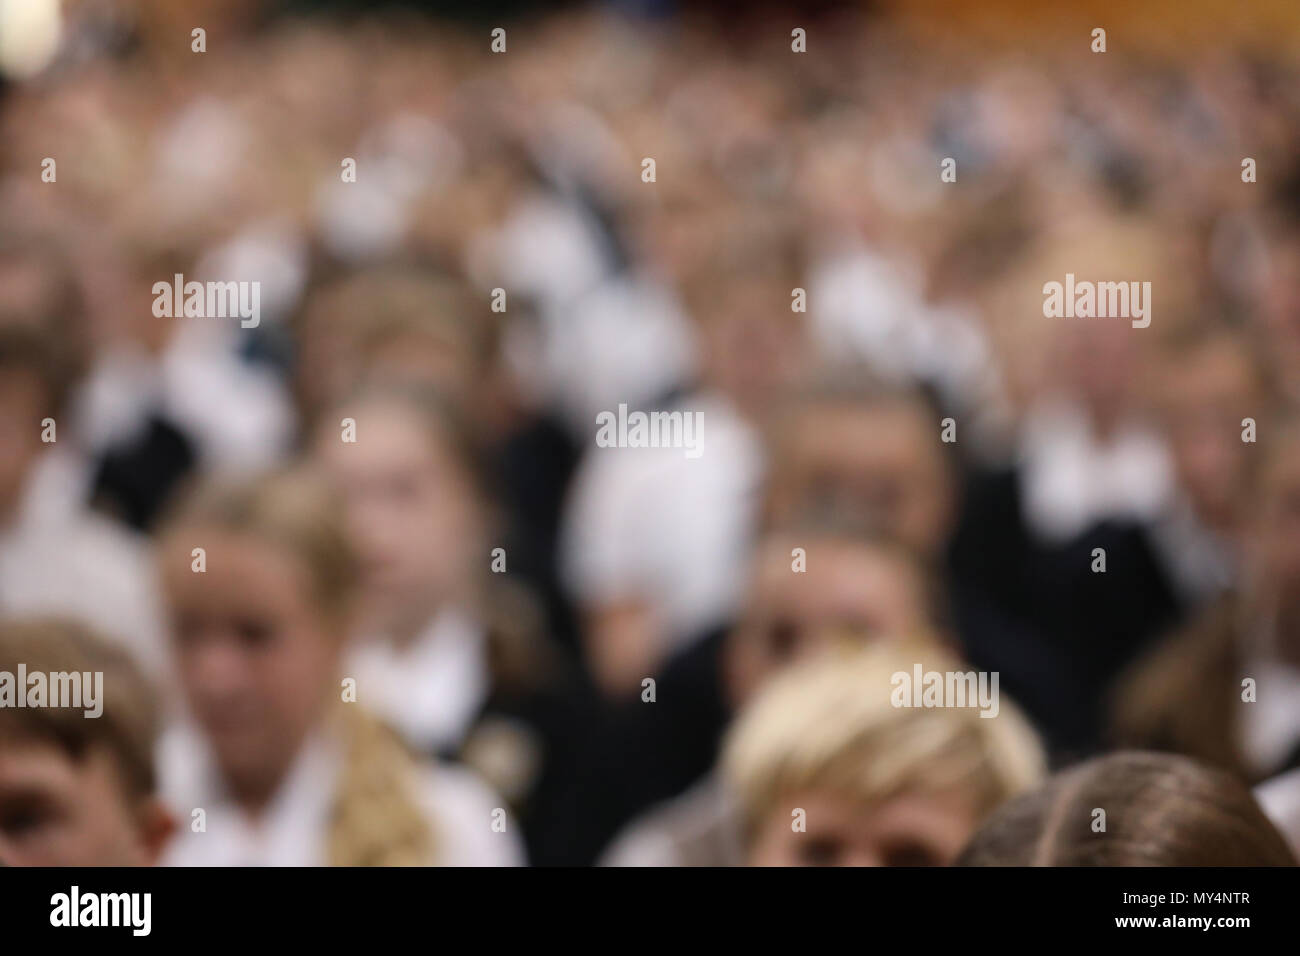 students in uniform sitting listening attentively at high school assembly facing the same direction. heavy blurred for anonymity and background effect Stock Photo